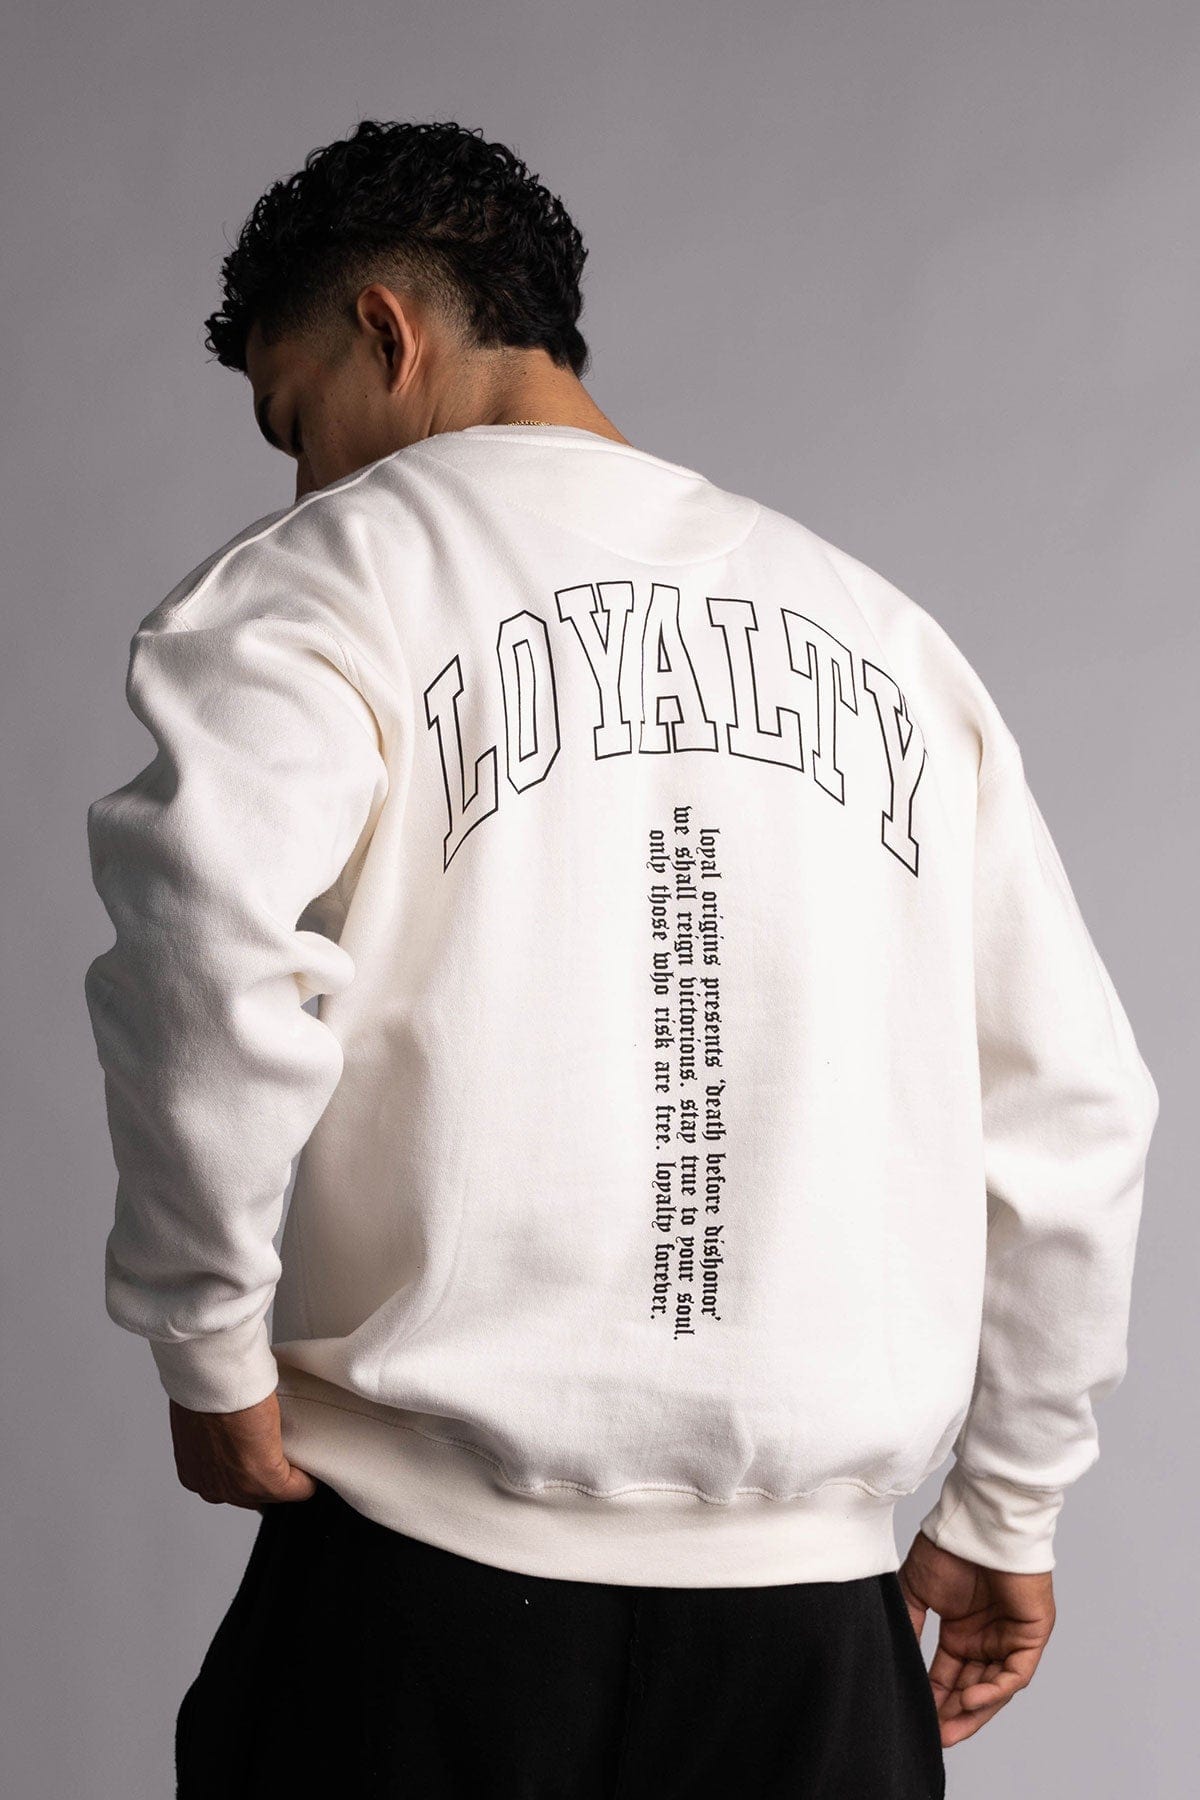 Select Crewneck 'Loyalty Forever'